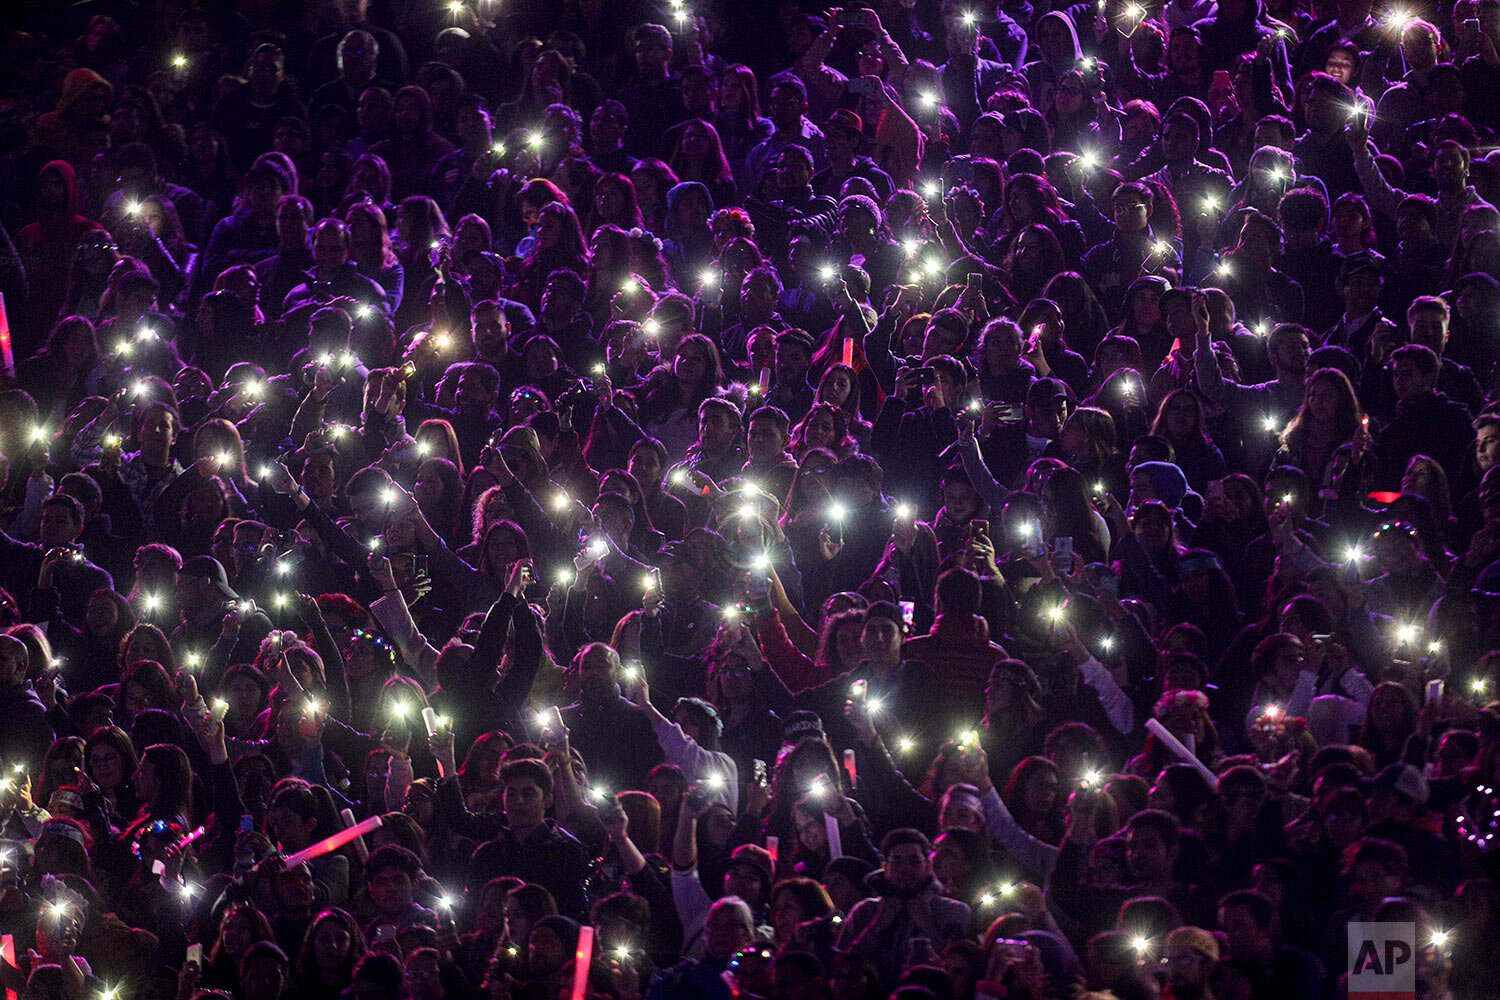  Fans of Maroon 5 shine their mobile phones during the show at the Vina del Mar International Song Festival at the Quinta Vergara coliseum in Vina del Mar, Chile, Wednesday, Feb. 27, 2020. (AP Photo/Esteban Felix) 